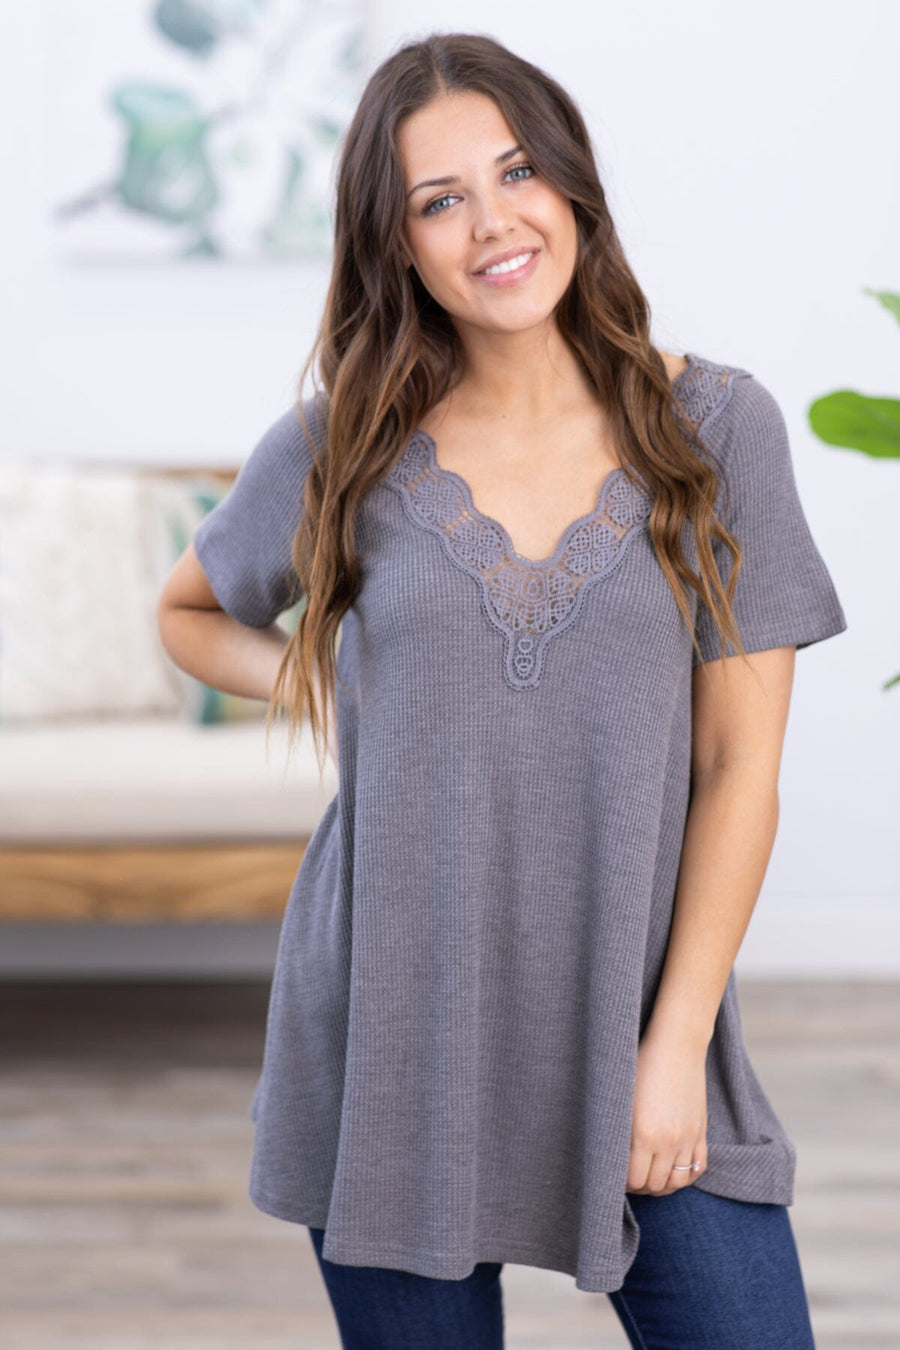 Grey Waffle Knit Top With Lace Trim - Filly Flair